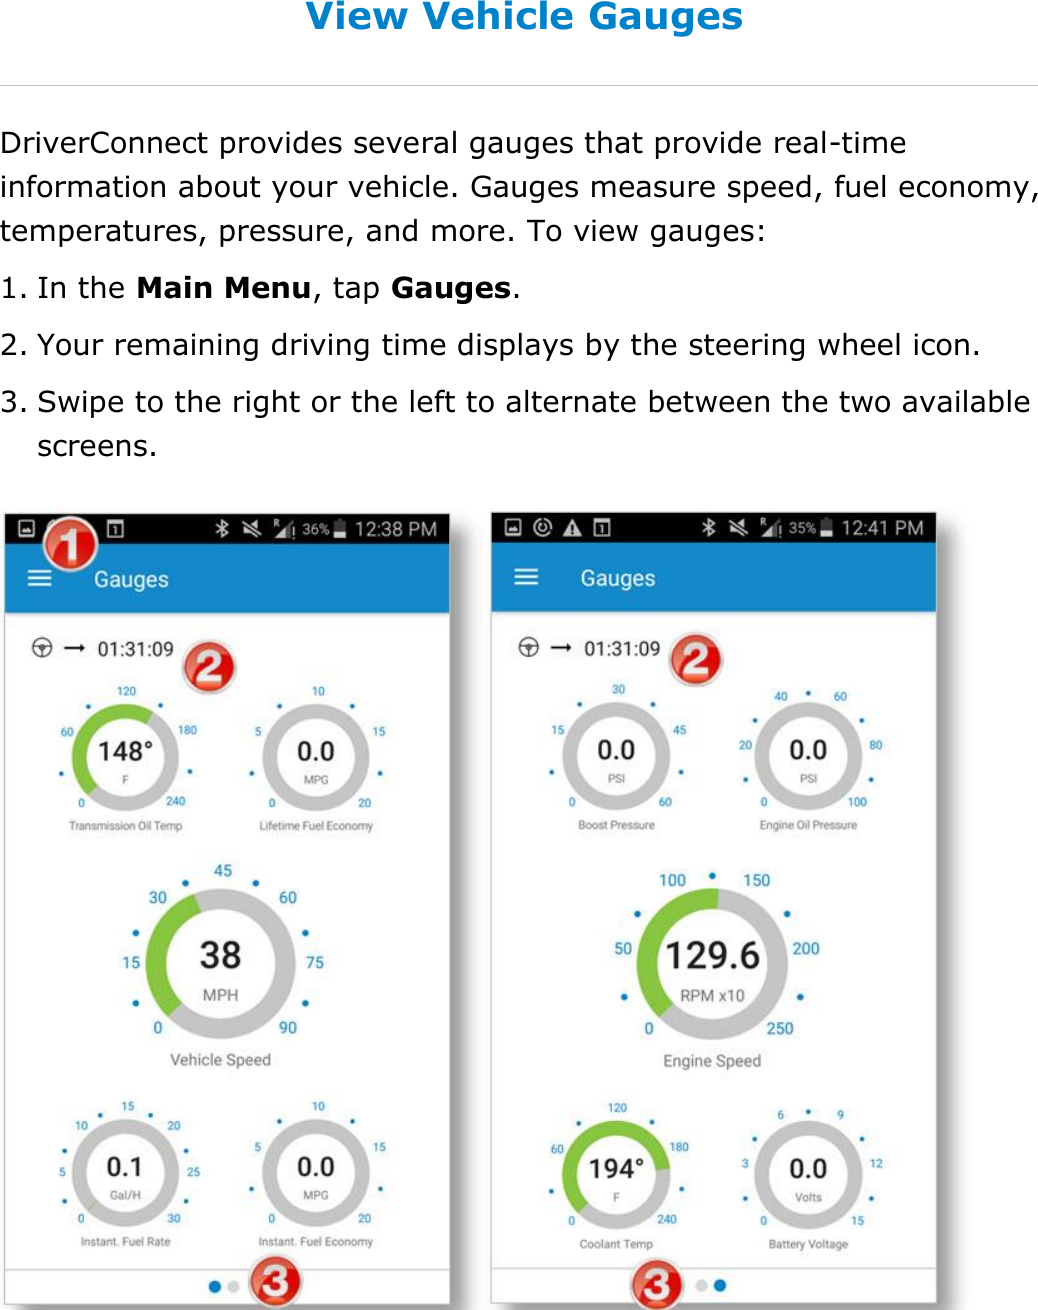 Set My Duty Status DriverConnect User Guide  33 © 2016-2017, Rand McNally, Inc. View Vehicle Gauges DriverConnect provides several gauges that provide real-time information about your vehicle. Gauges measure speed, fuel economy, temperatures, pressure, and more. To view gauges: 1. In the Main Menu, tap Gauges.  2. Your remaining driving time displays by the steering wheel icon. 3. Swipe to the right or the left to alternate between the two available screens.    